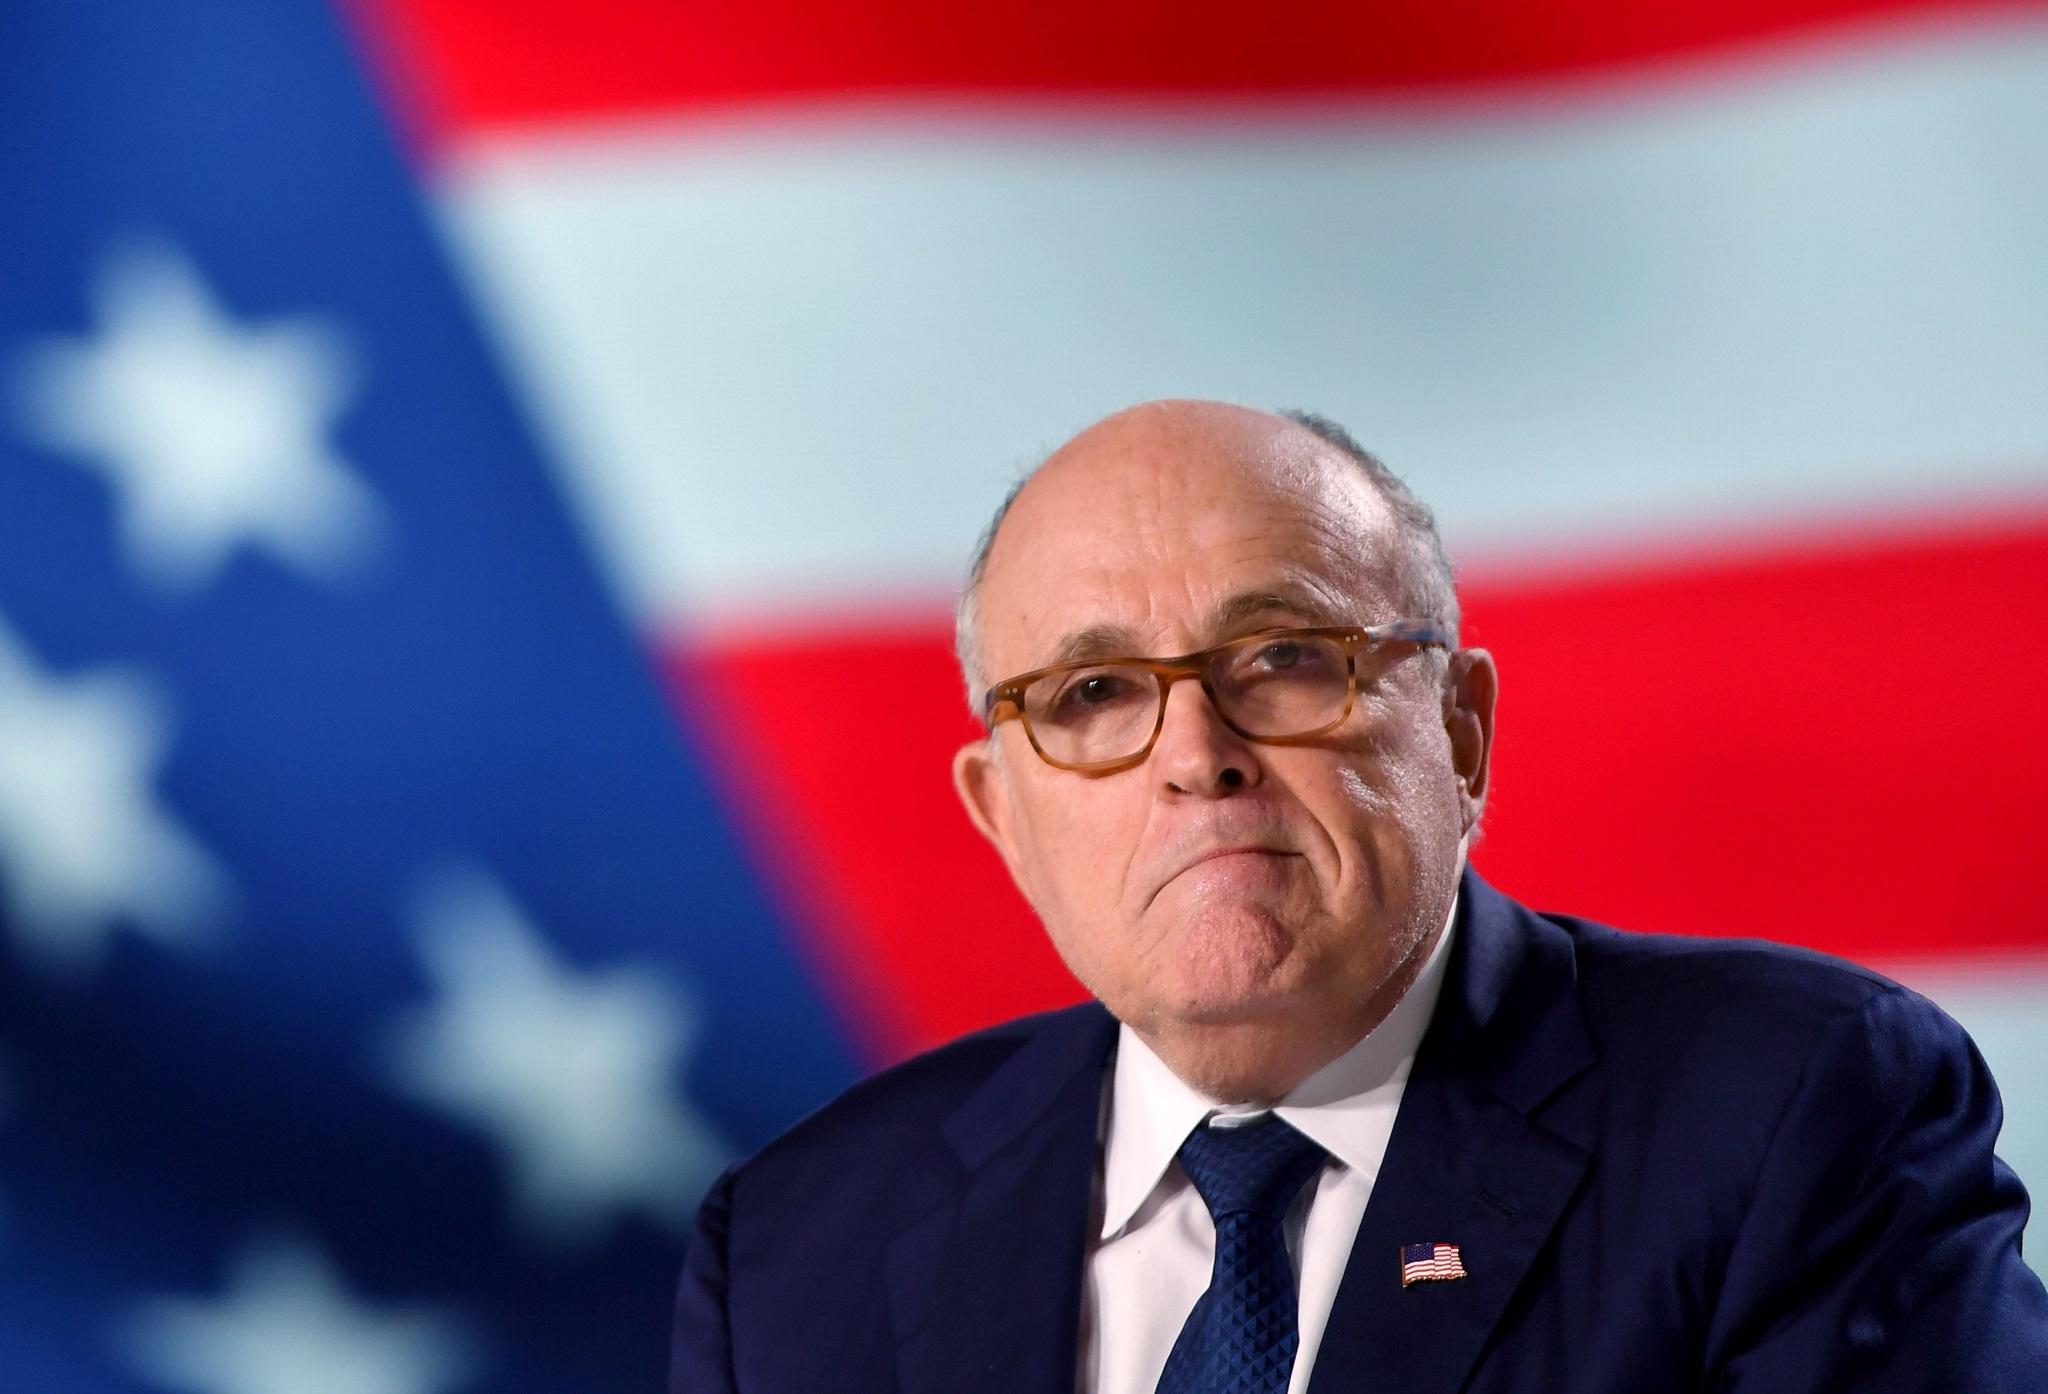 Giuliani joined Trump's team in April 2018 after lawyers left the President's legal campaign